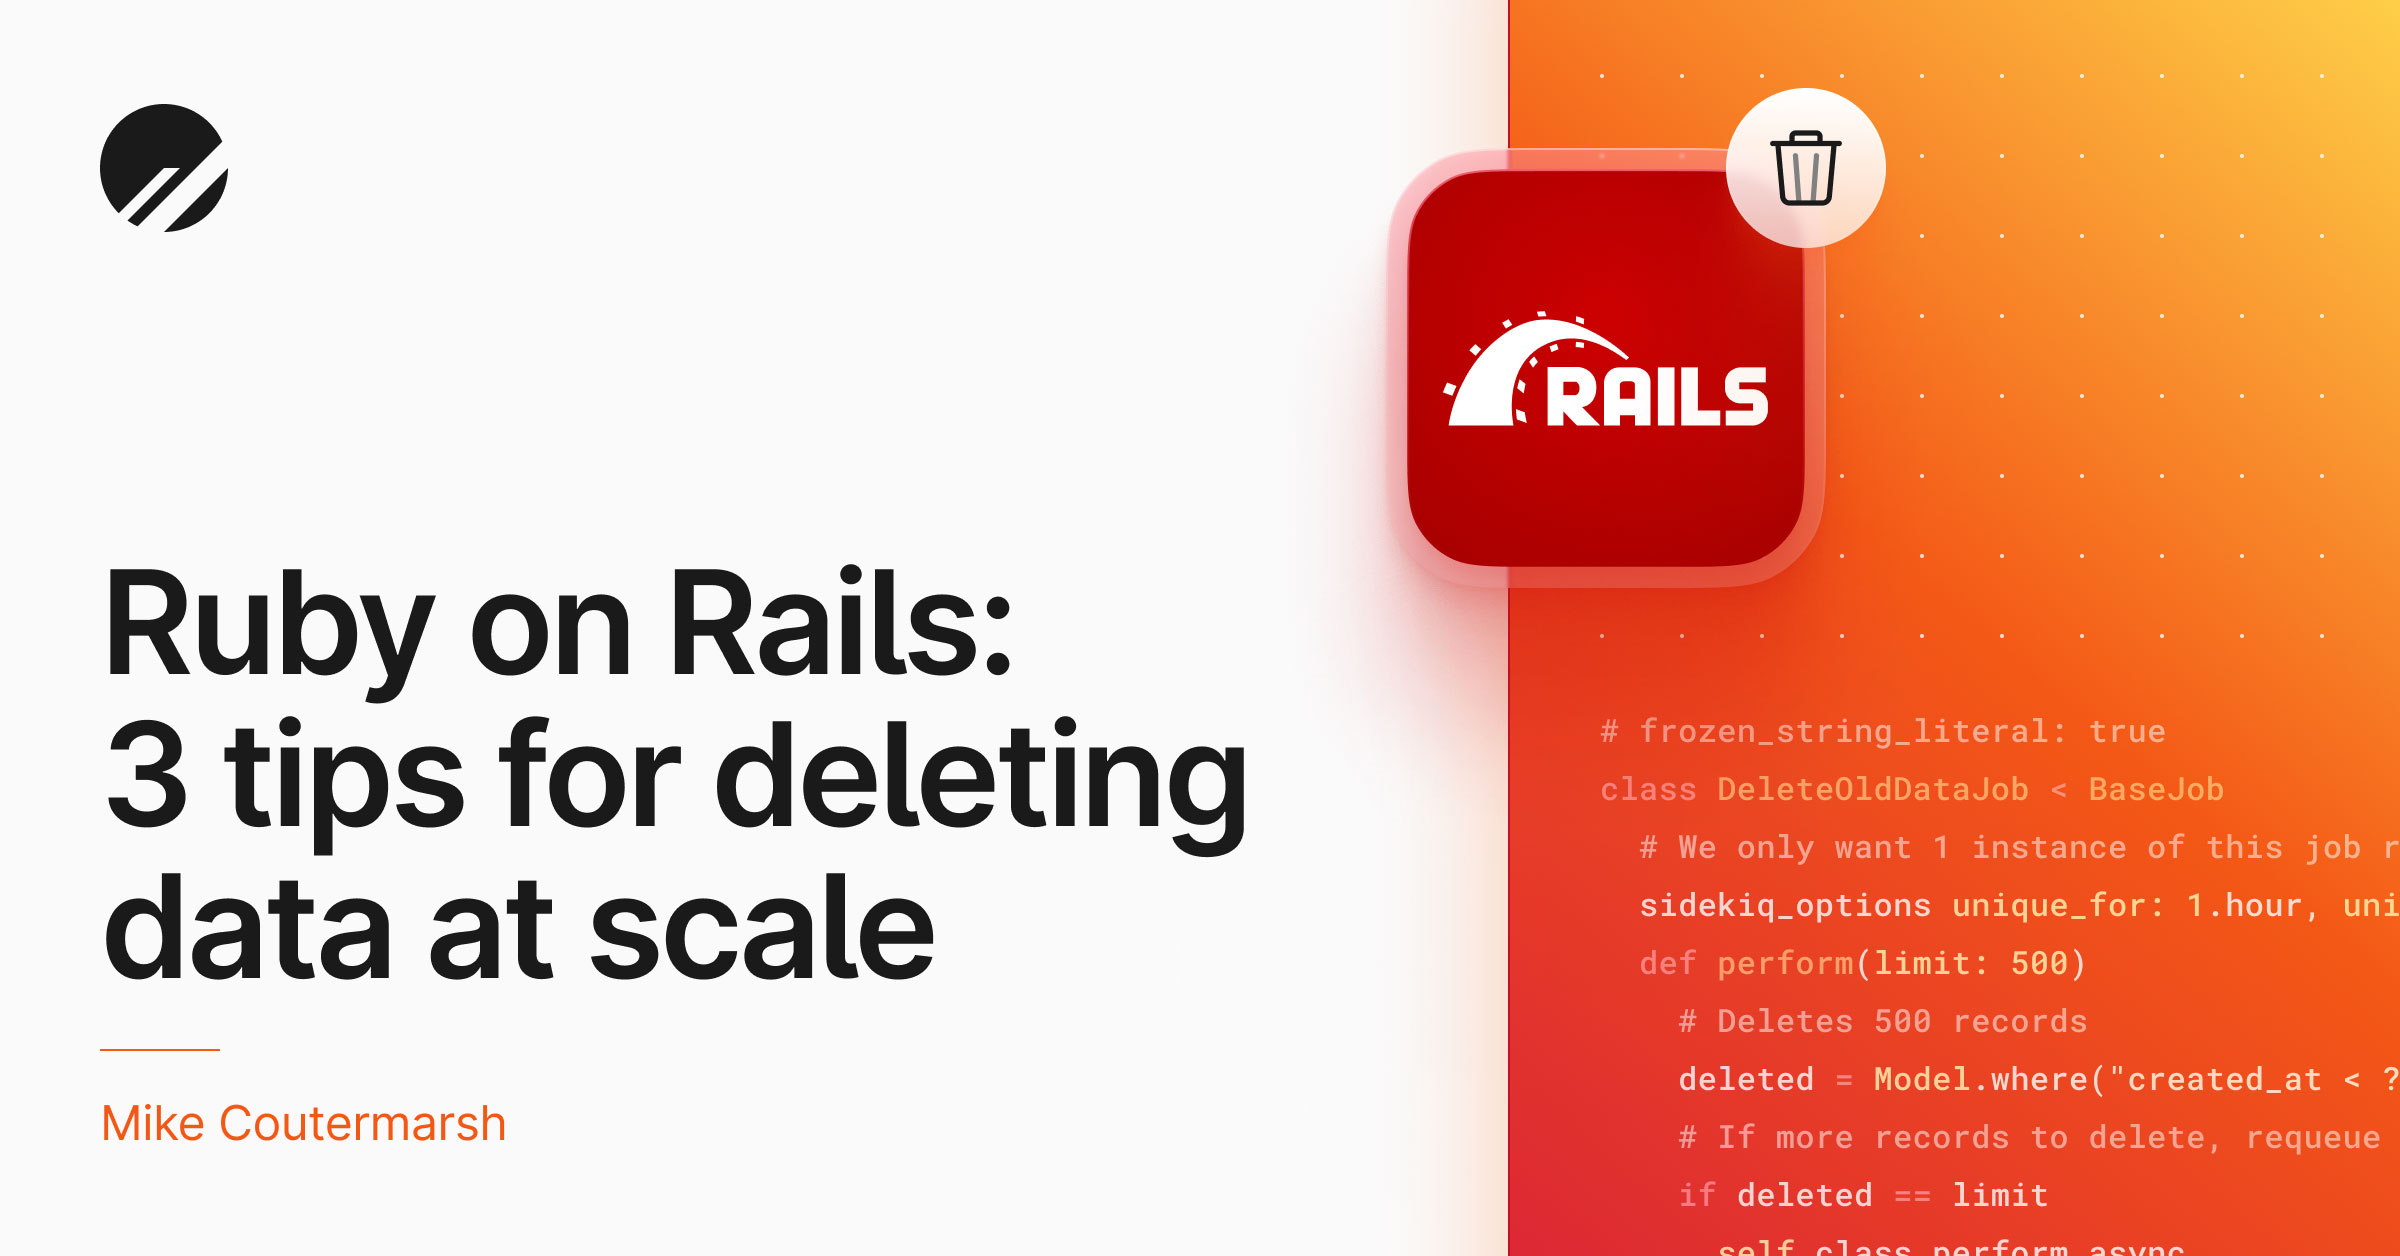 Ruby on Rails: 3 tips for deleting data at scale